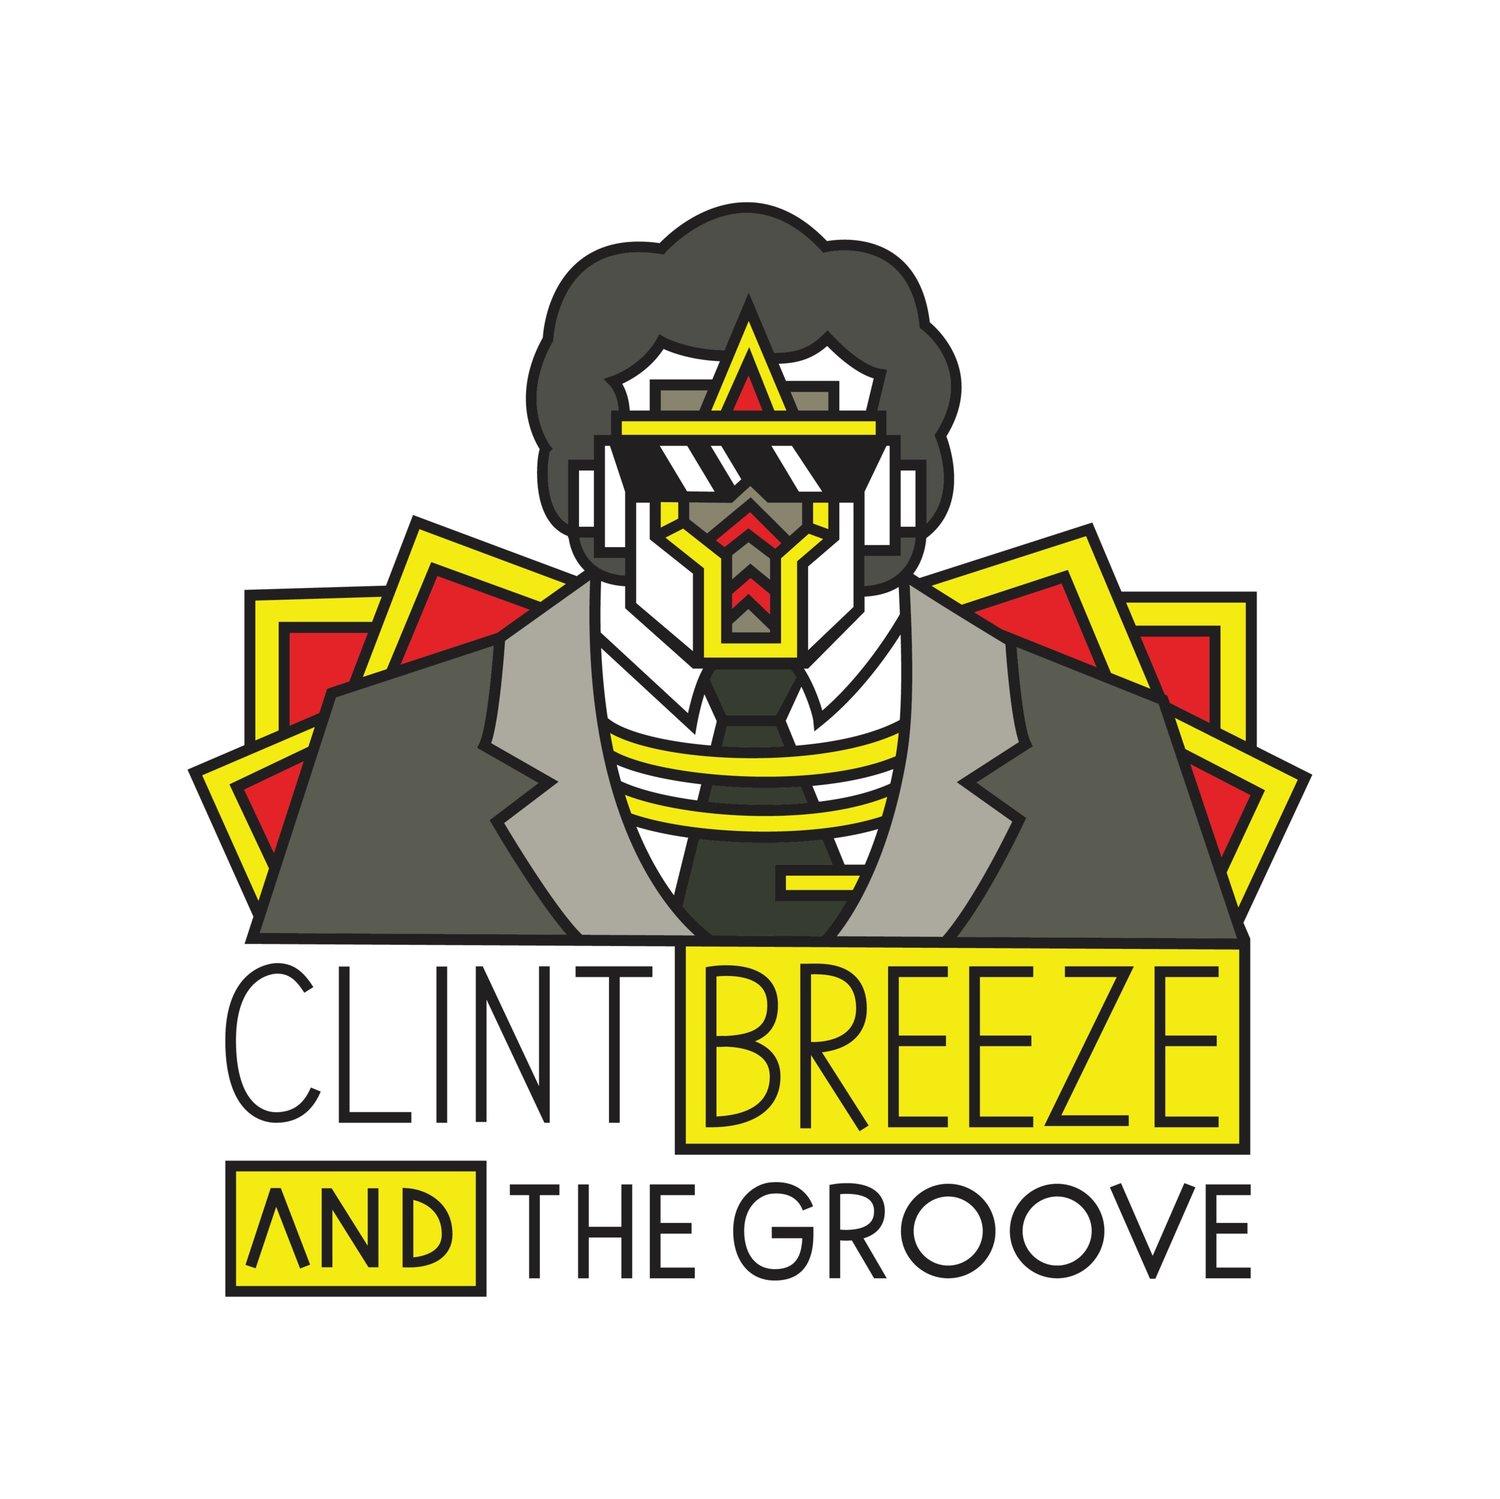 Clint Breeze and the Groove